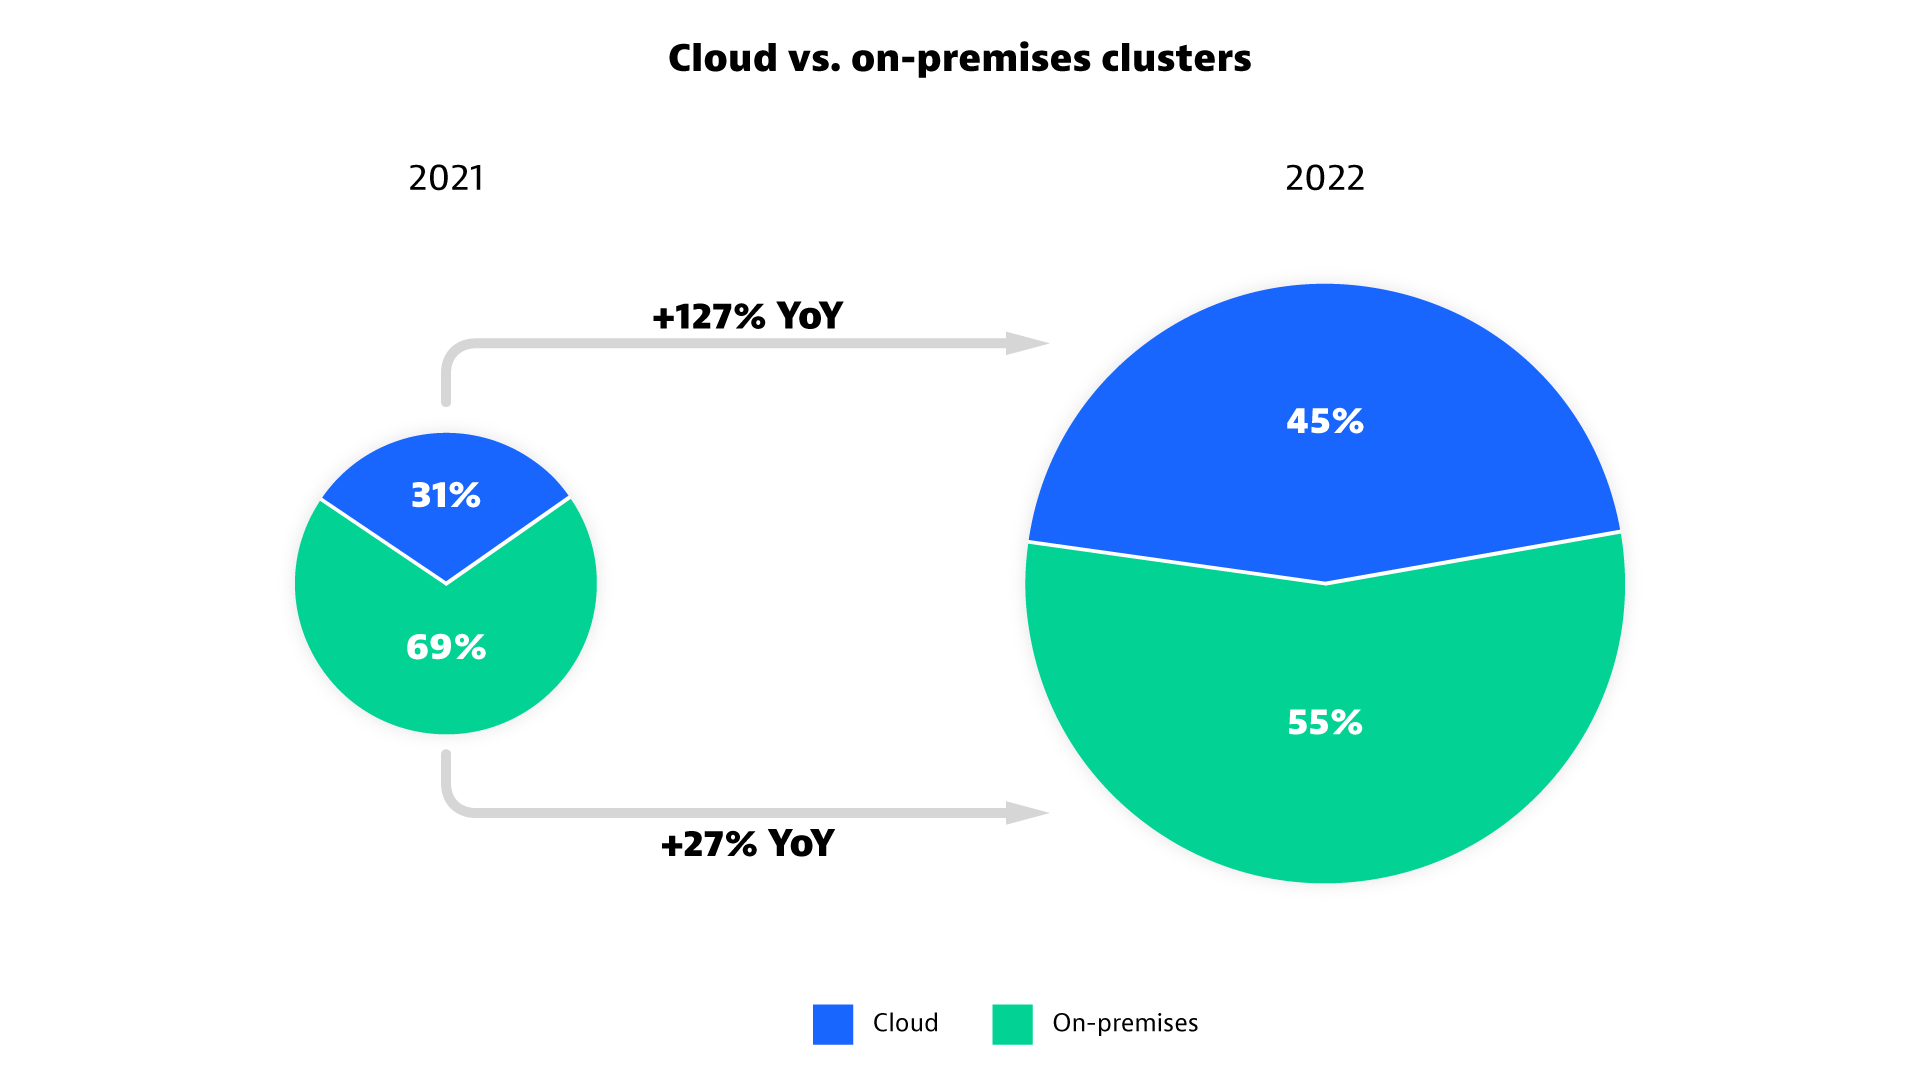 Pie charts showing cloud-hosted clusters vs. on-premises clusters